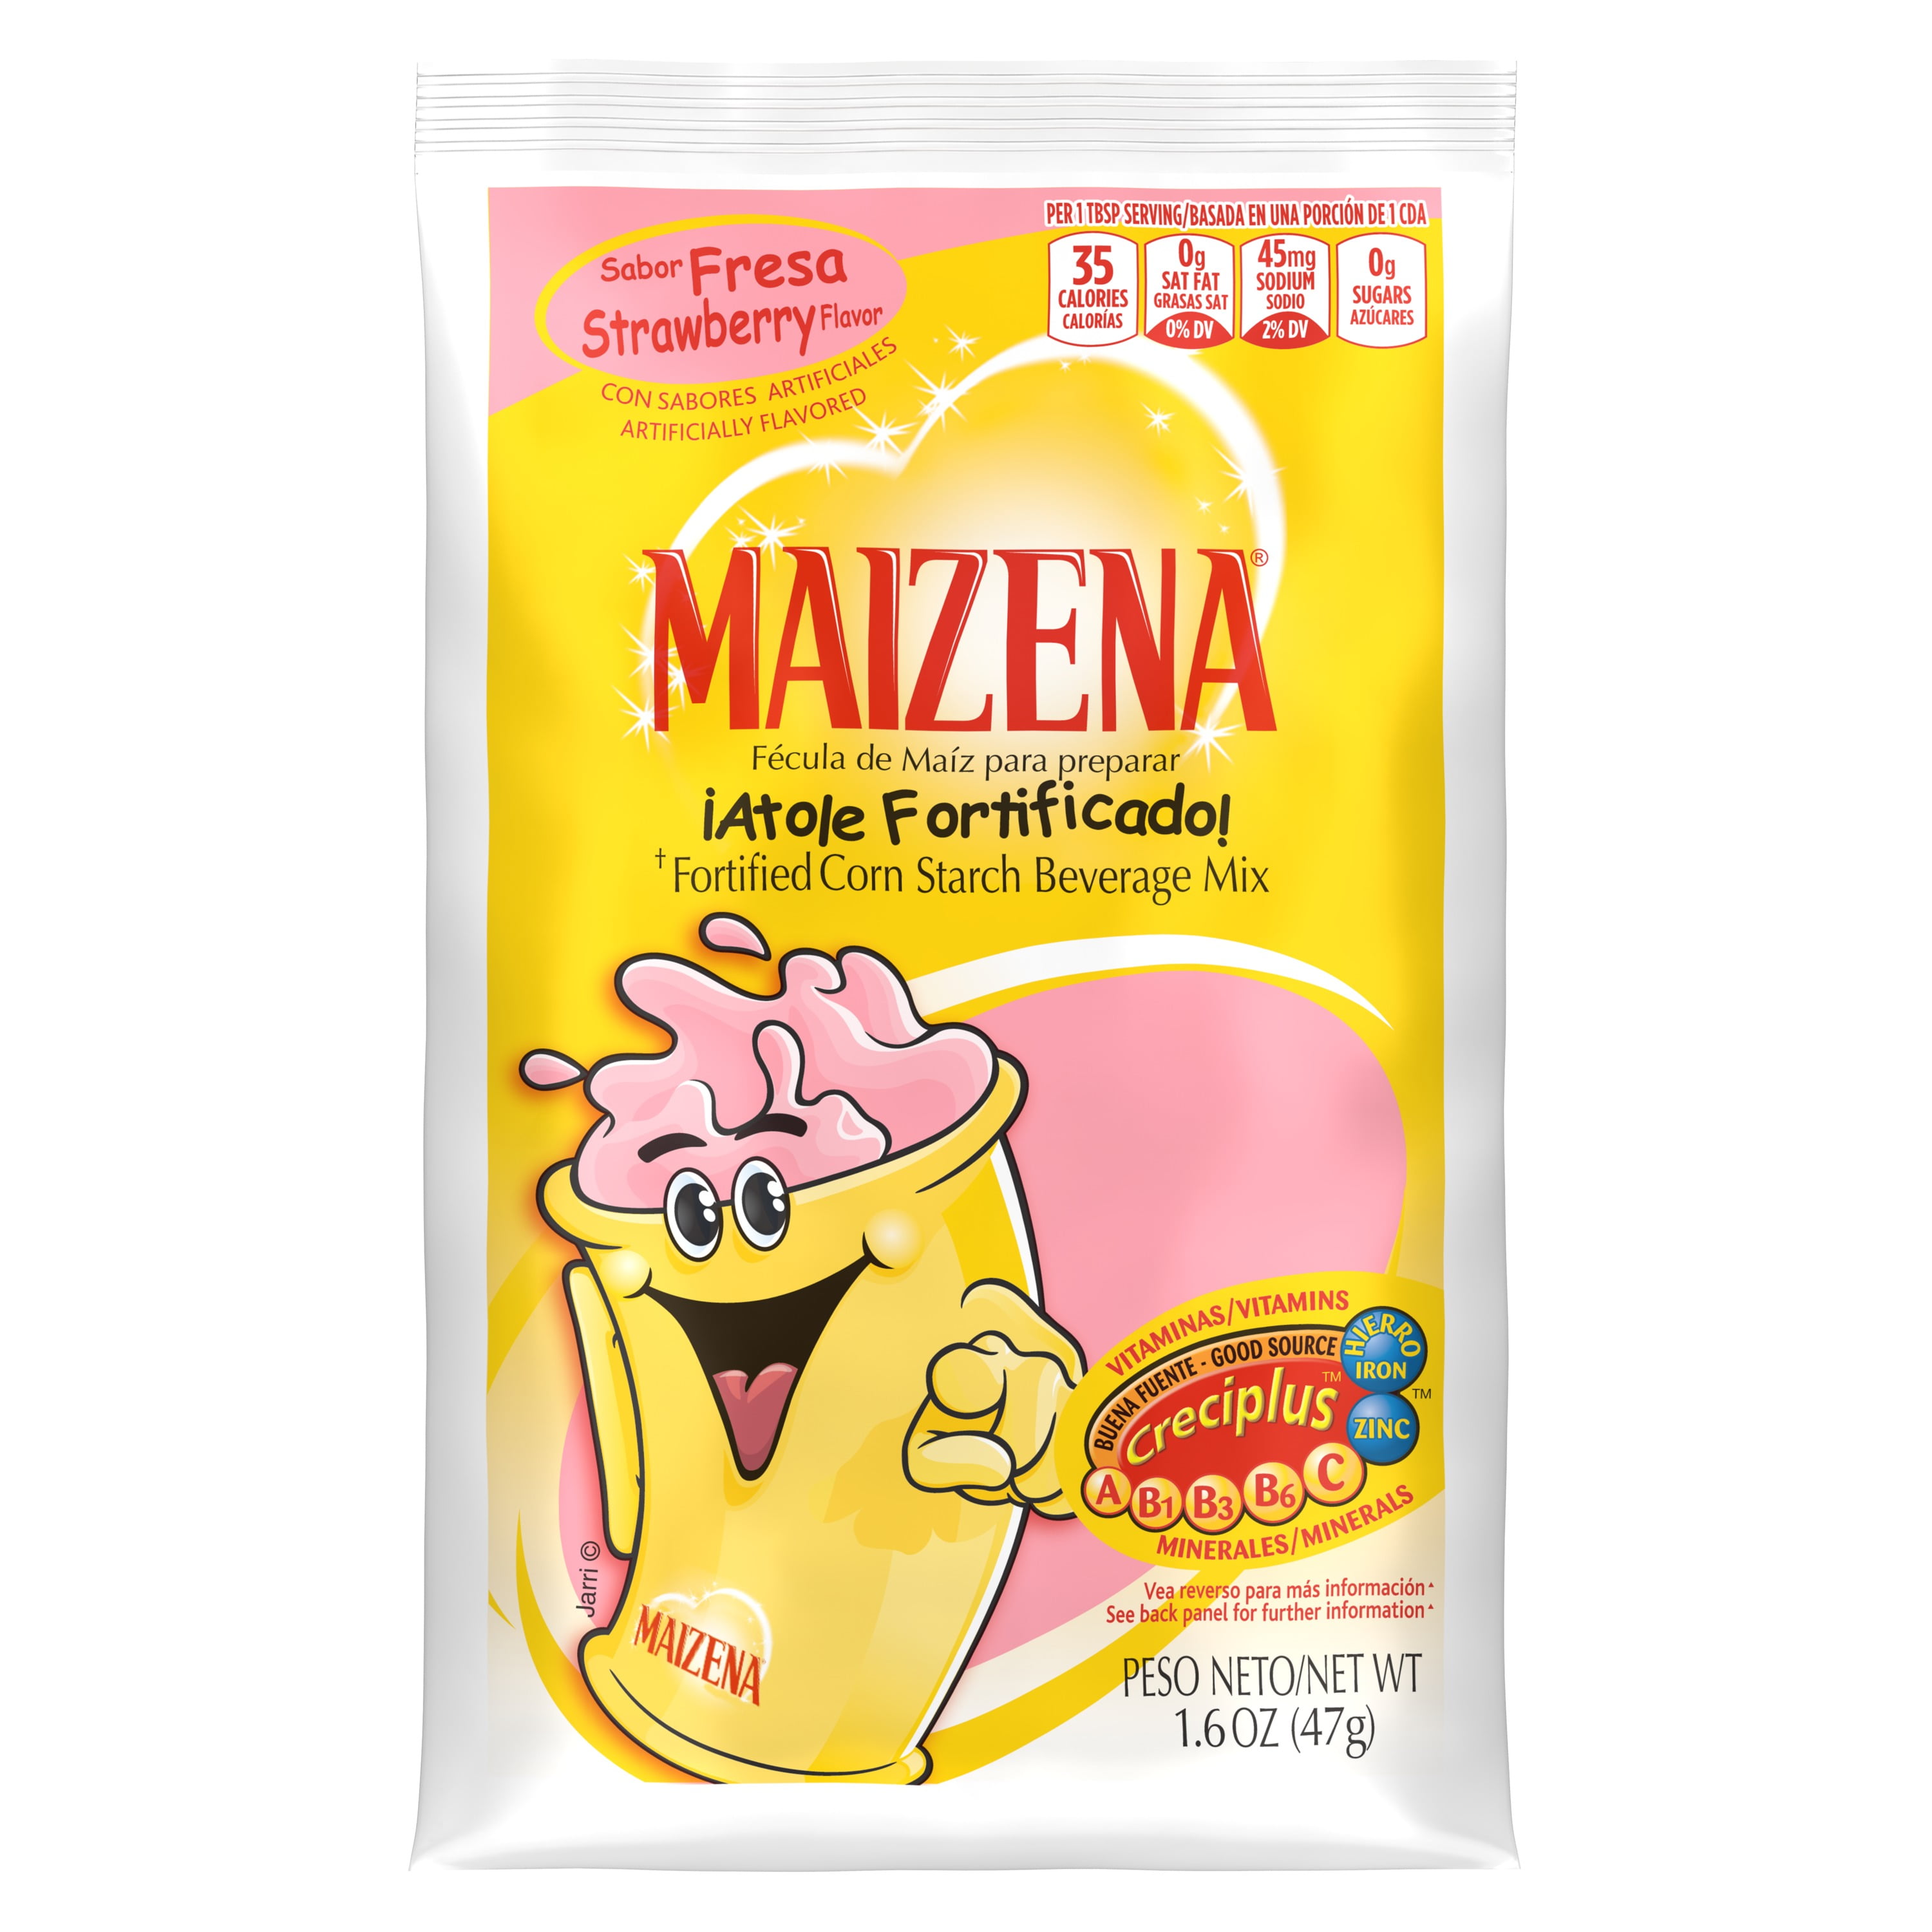 A cup of any flavor of Maizena Atoles prepared with milk or hot water provi...